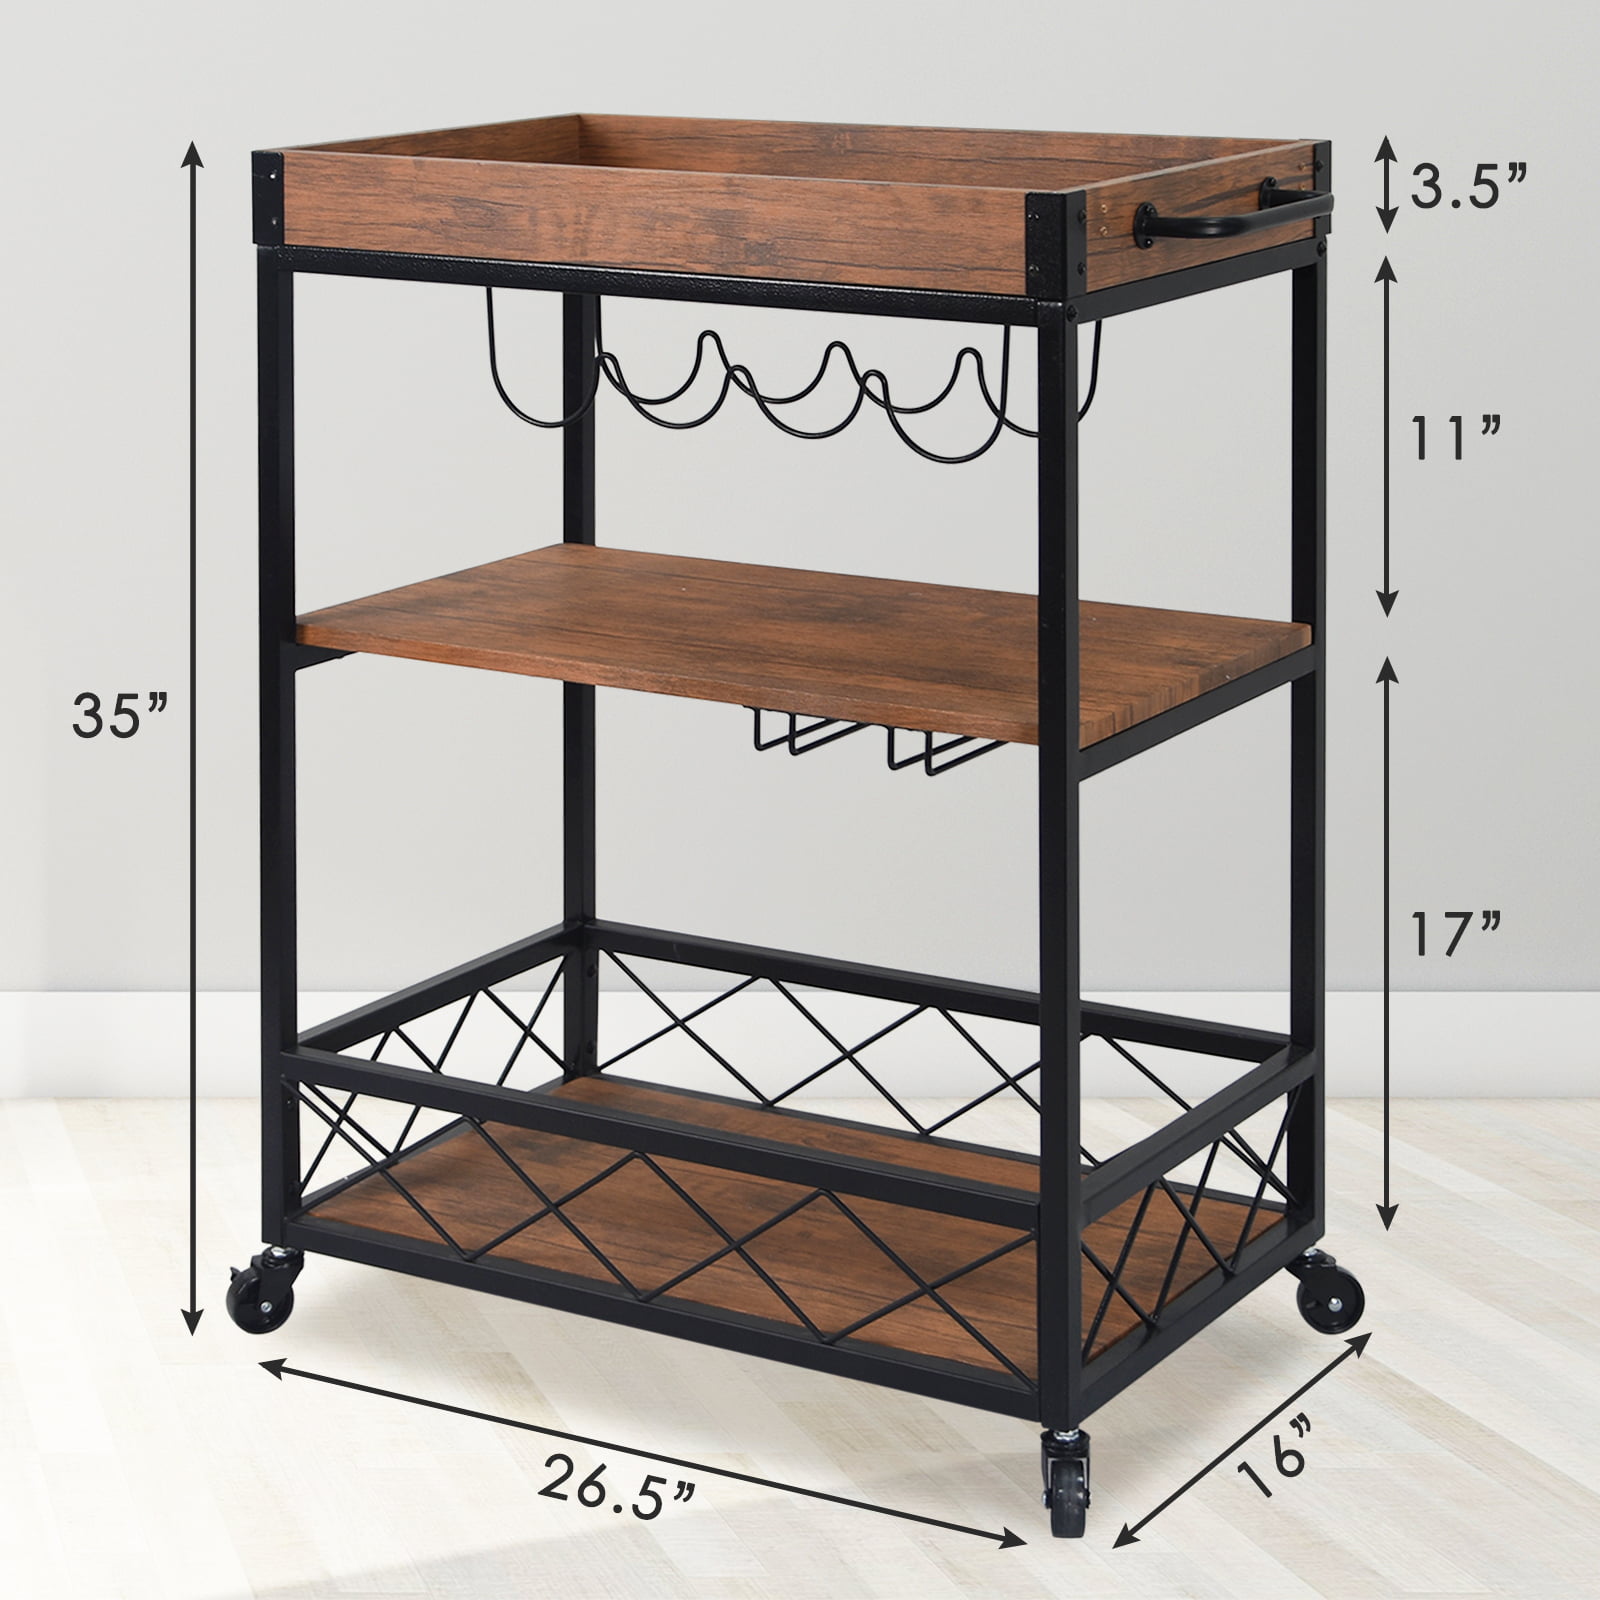 NSdirect Kitchen Island Cart,Industrial Kitchen Bar&Serving Cart Rolling on Wheels Utility Storage Trolley with 3-Tier Wine Rack Shelves&Three Storage Drawers,Soild Rubber Wood Top,White 